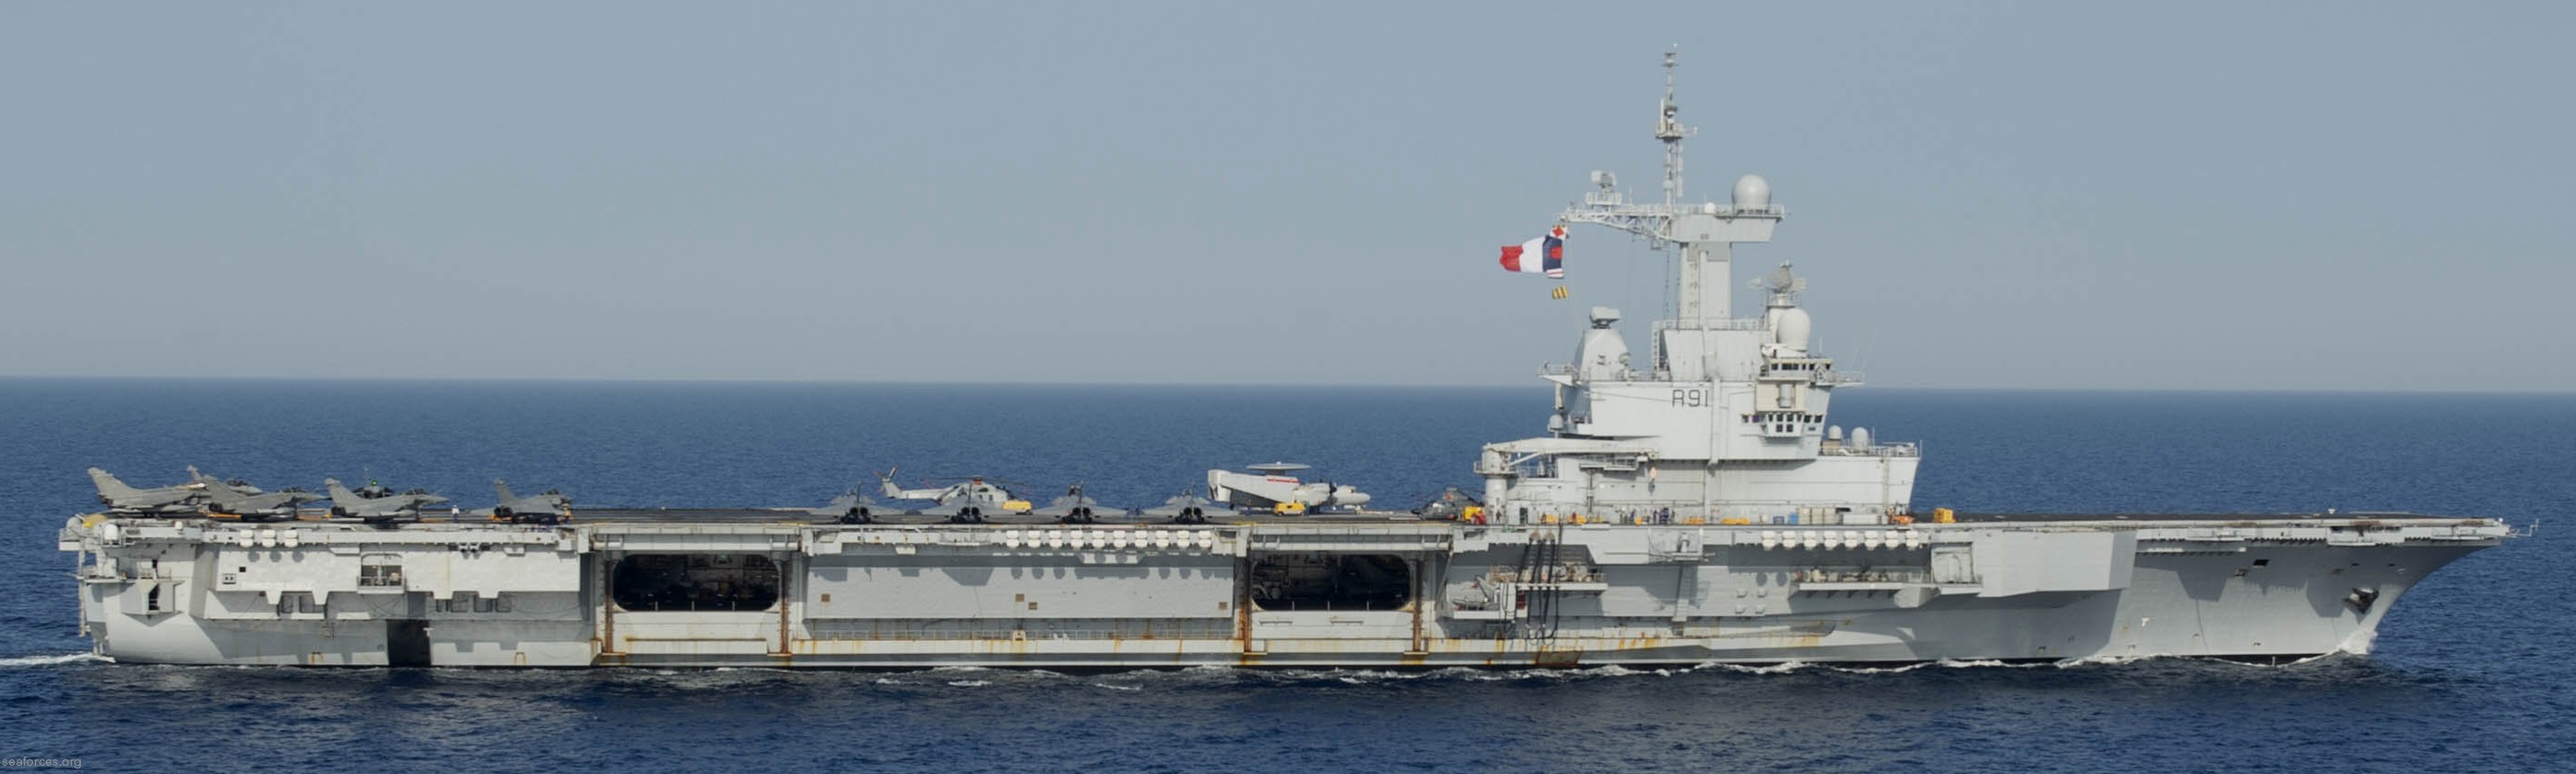  r-91 fs charles de gaulle aircraft carrier french navy 55